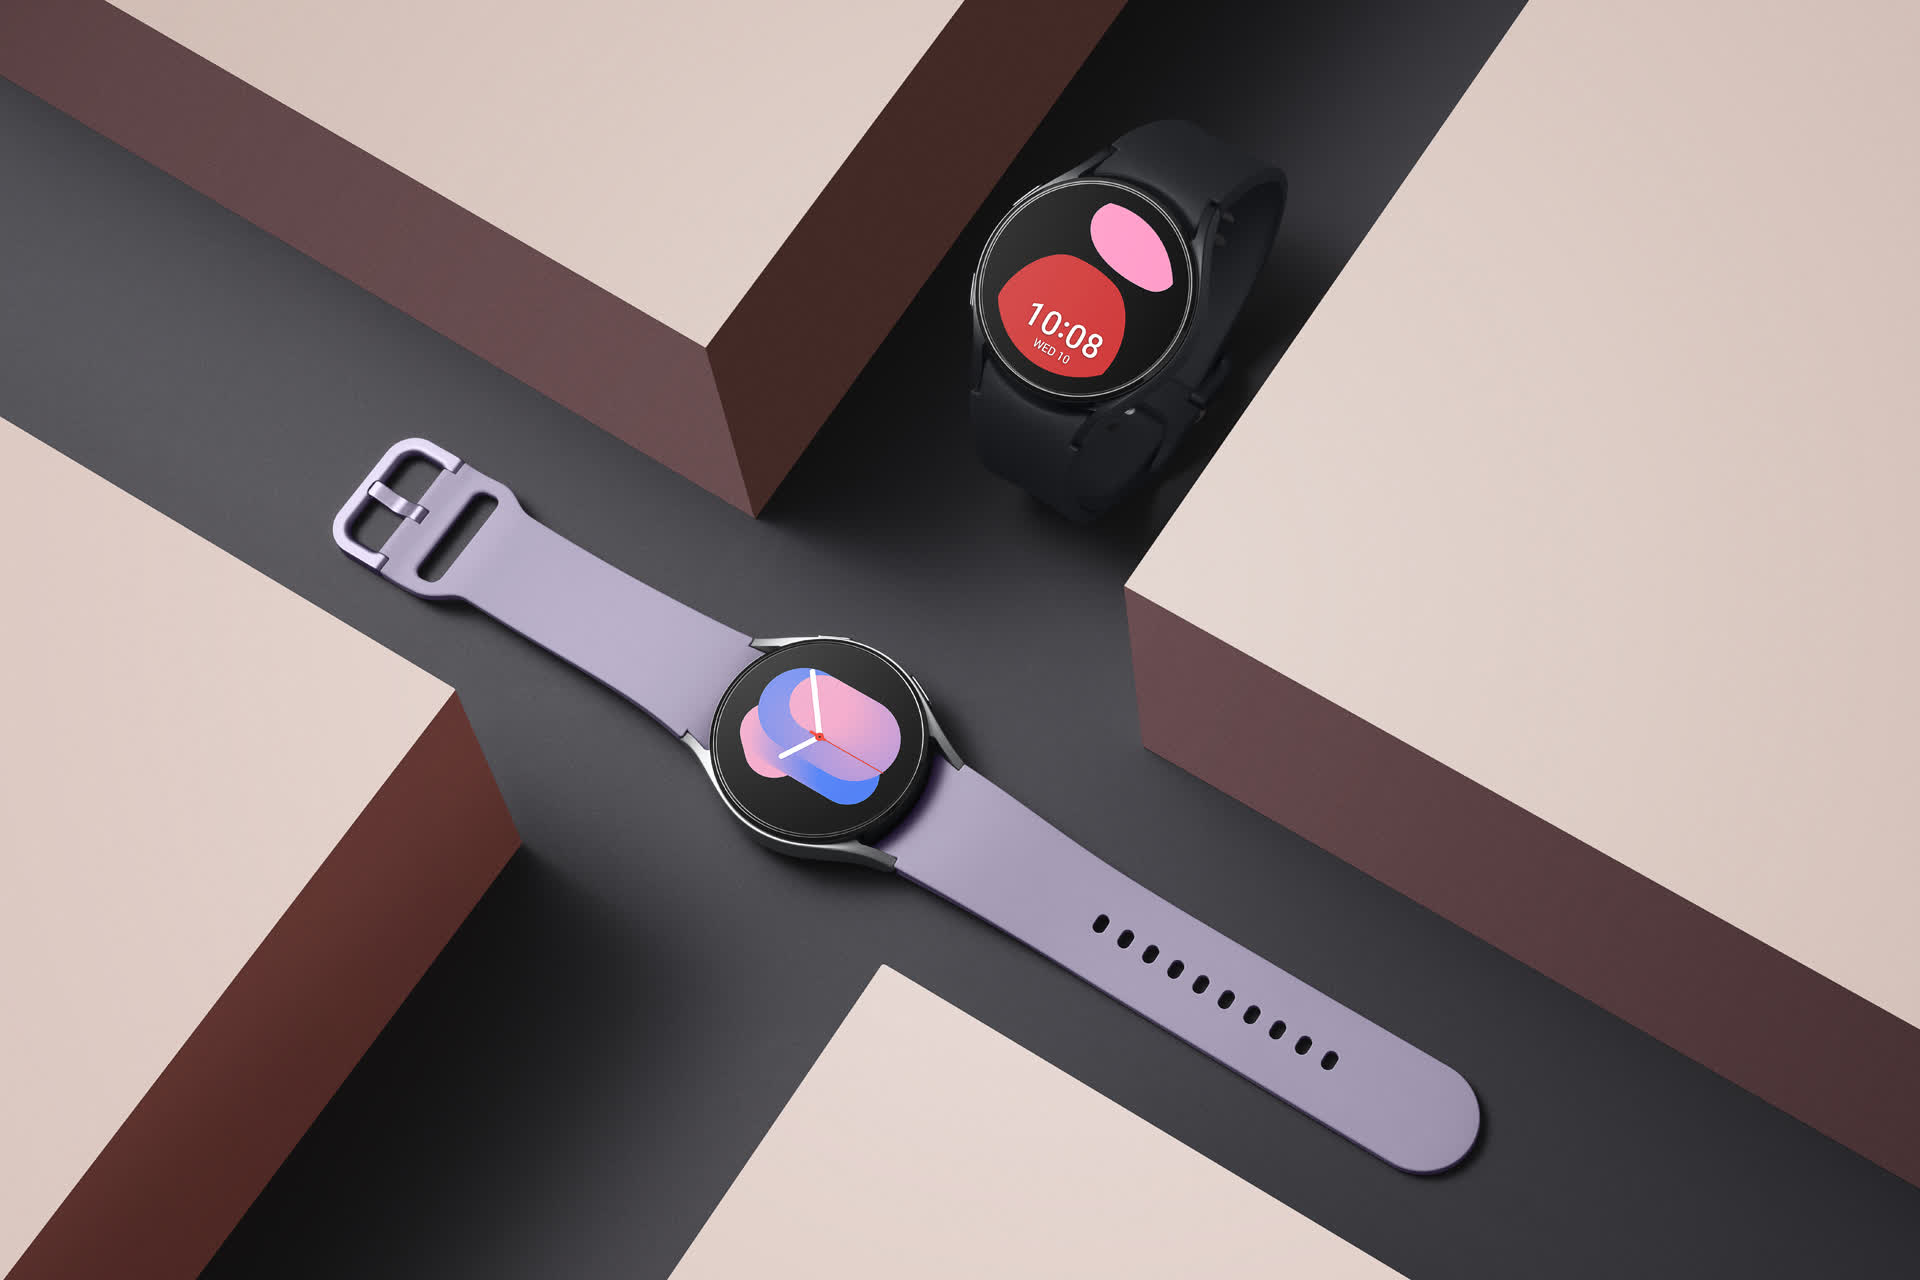 Most smartwatch makers are playing fast and loose with thickness specs